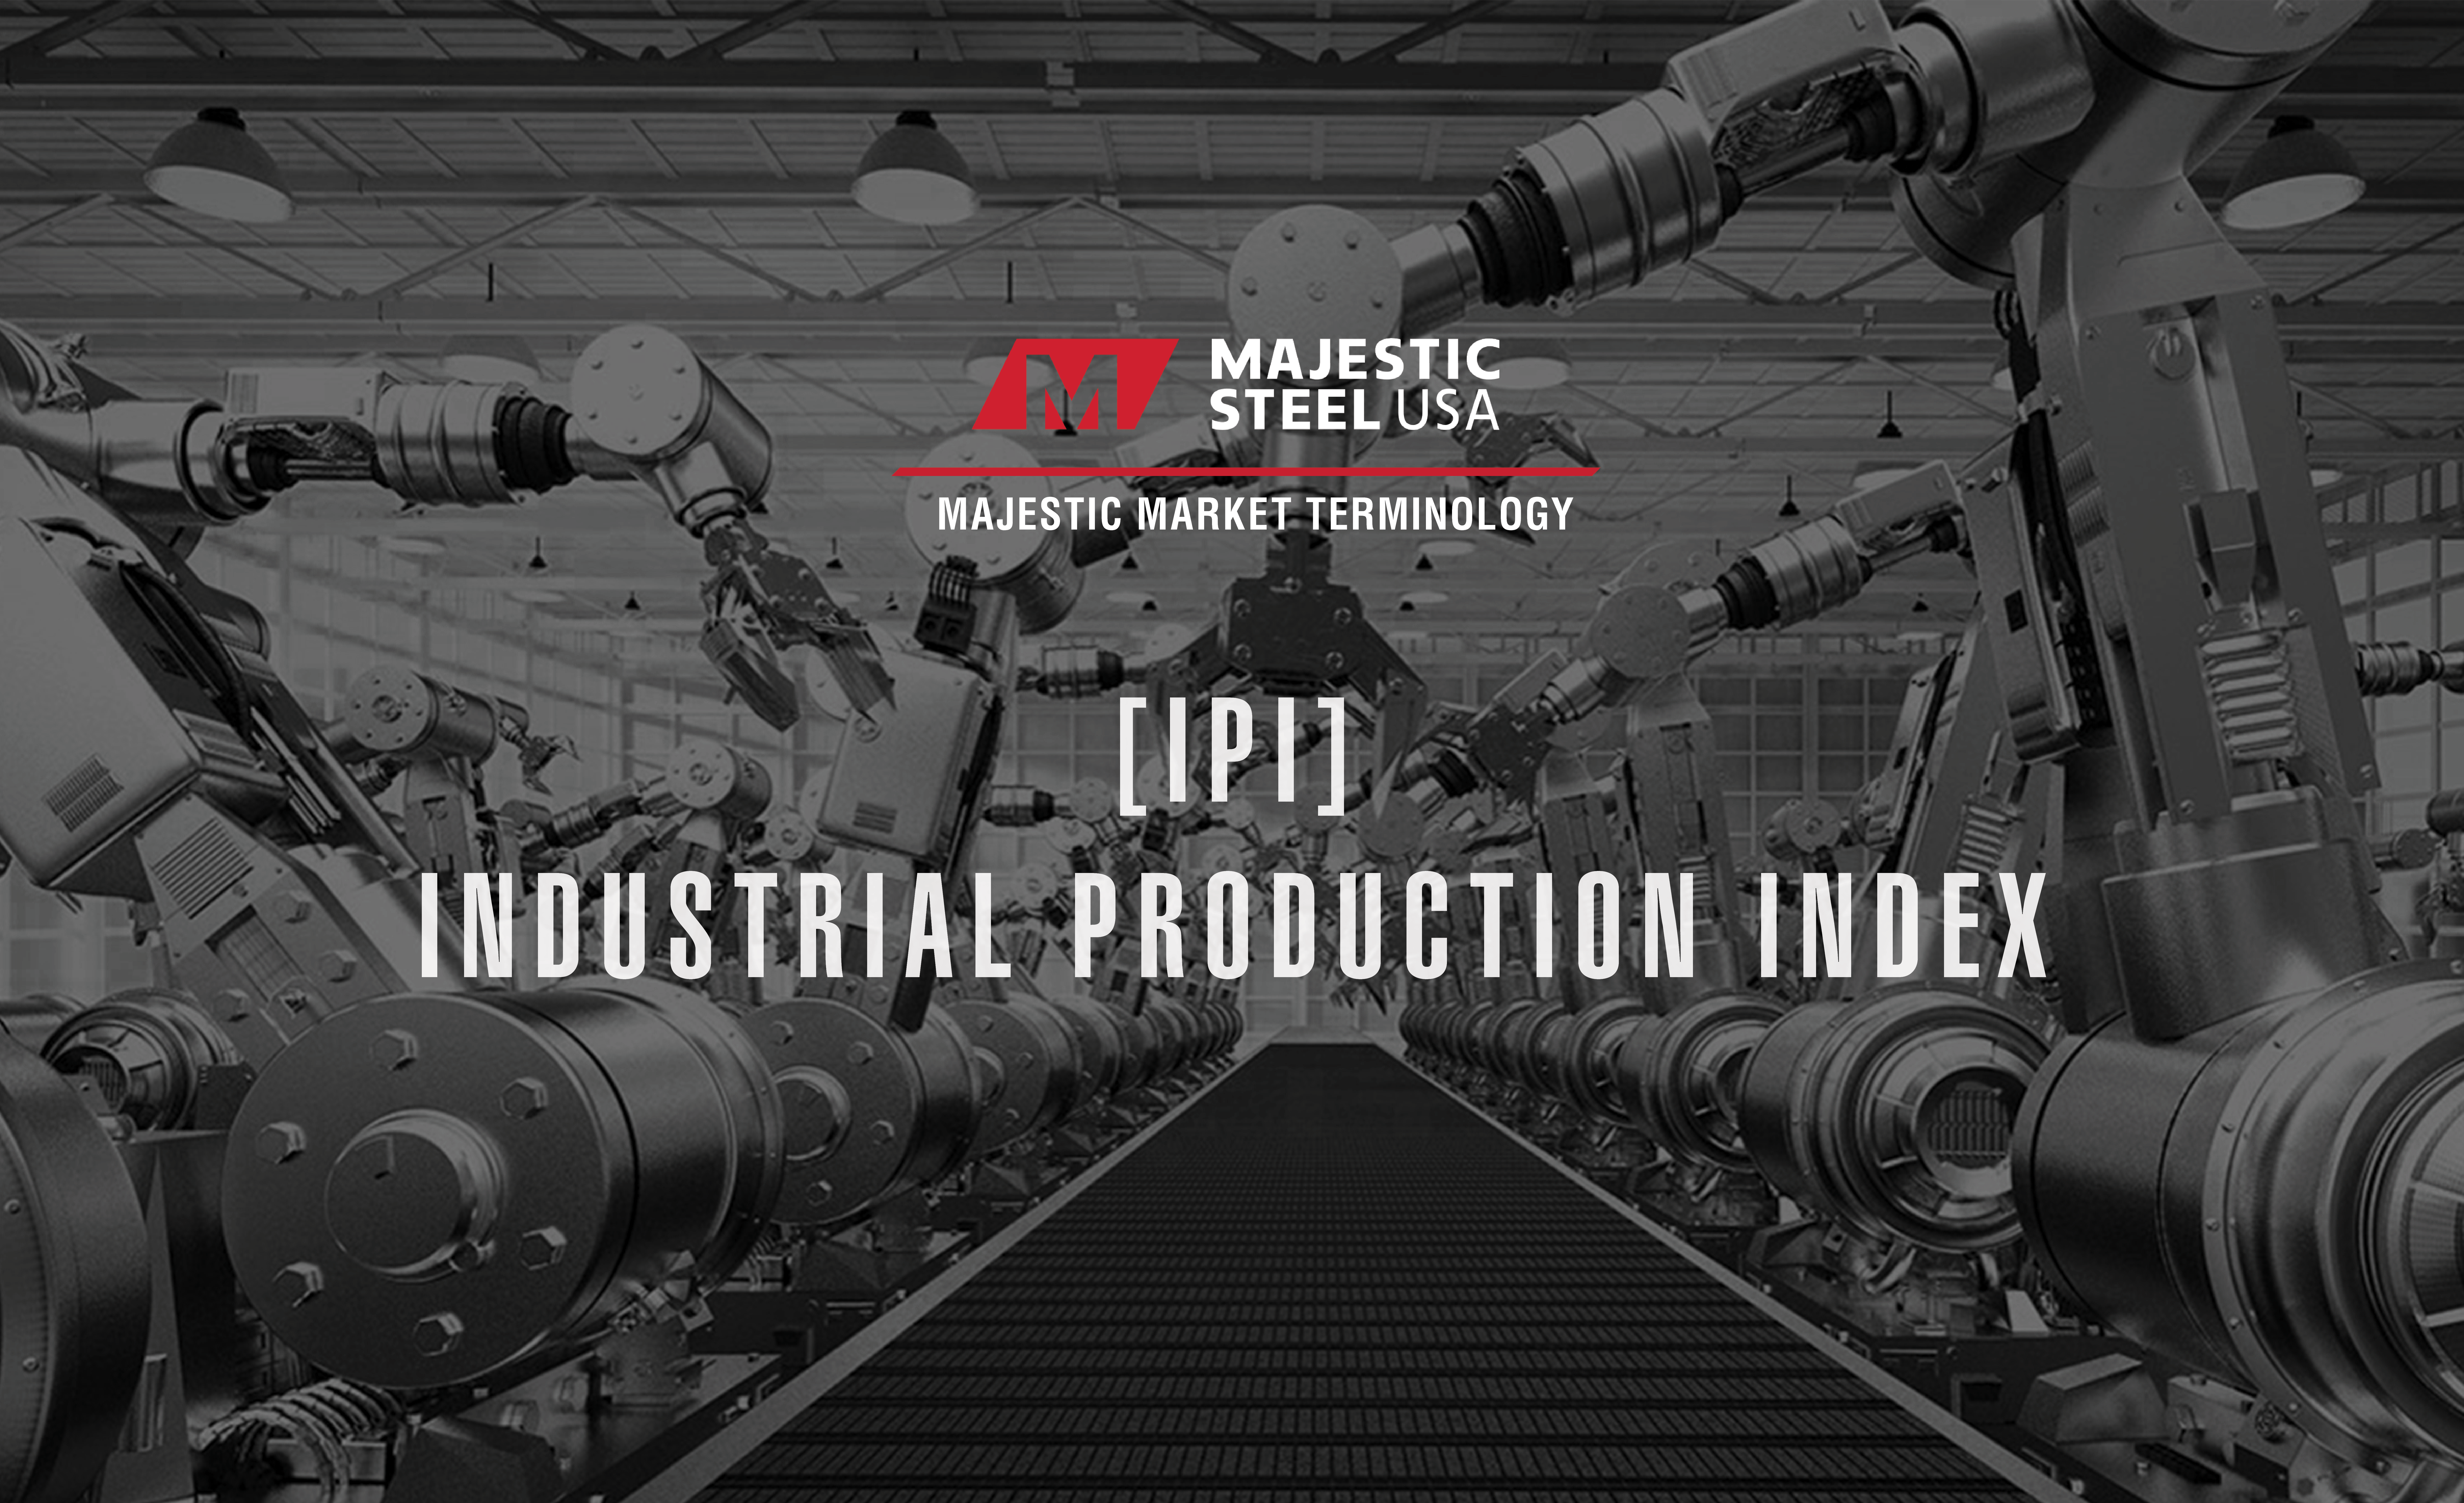 black and white image of machinery that represents industrial production index